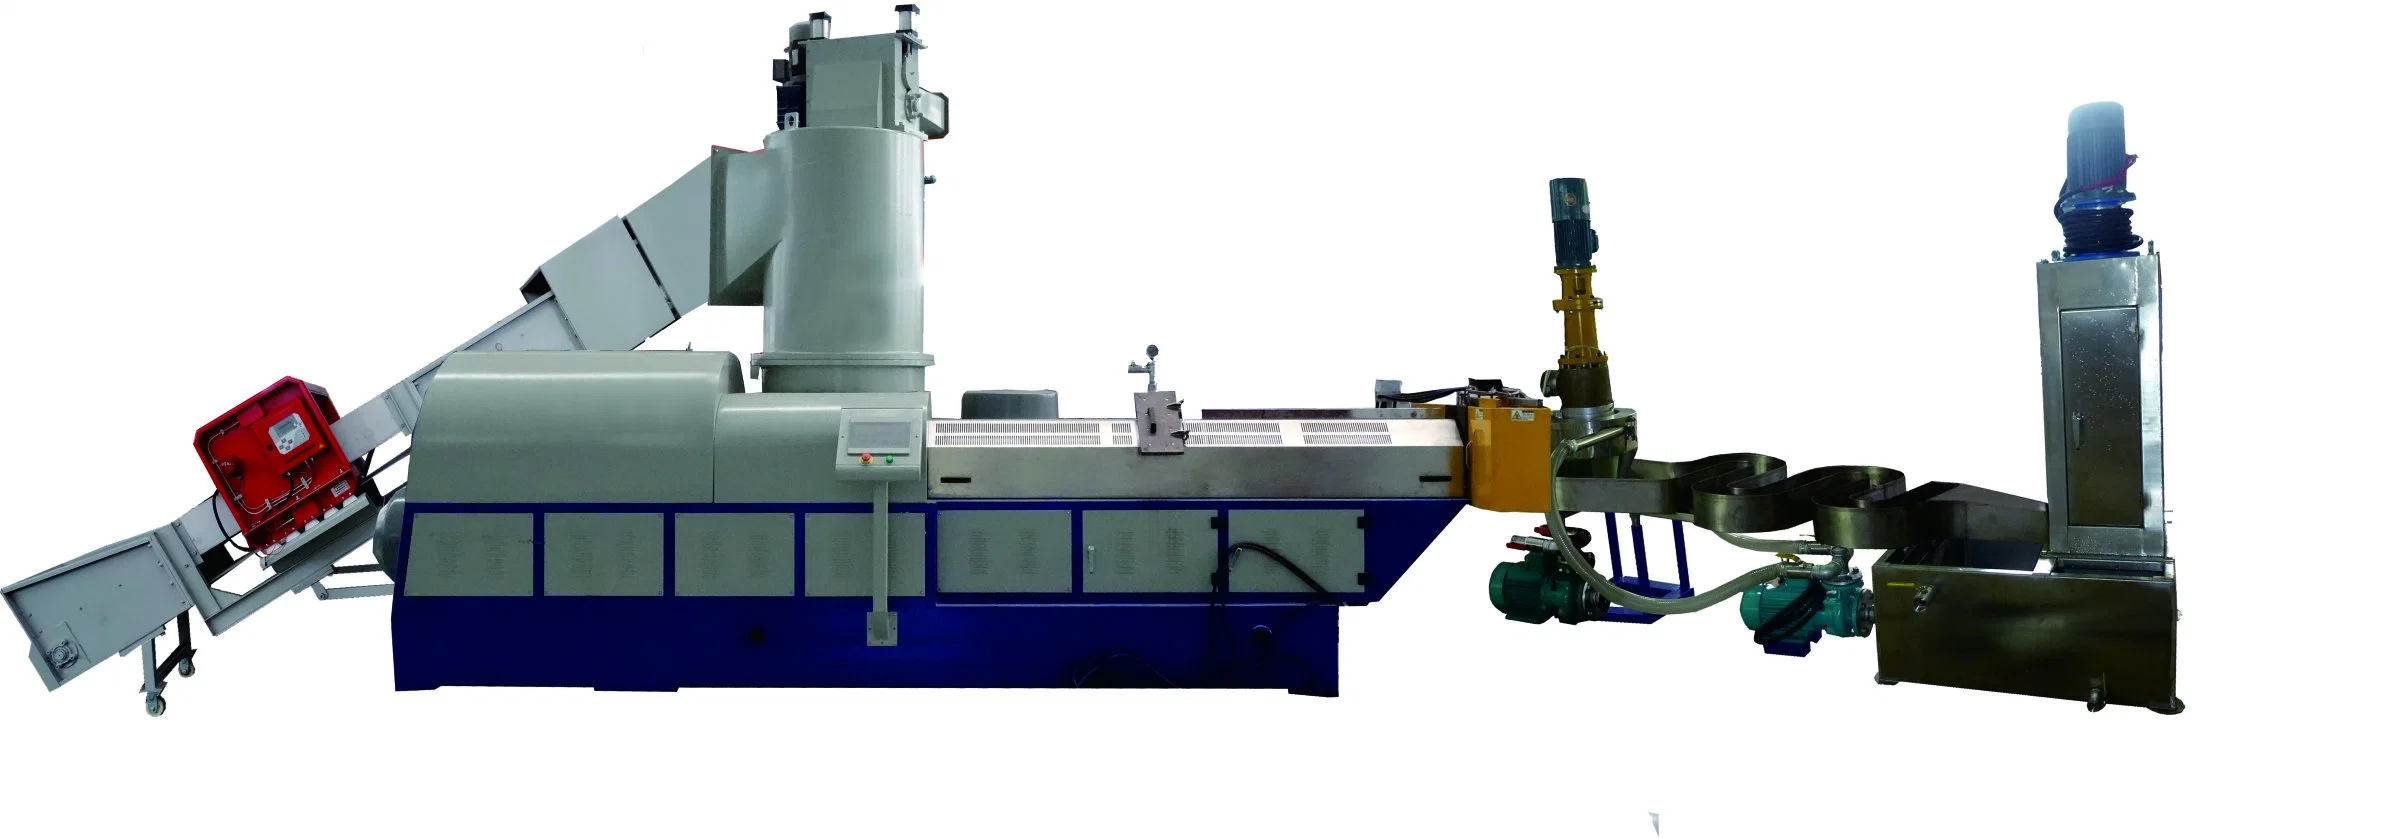 PP PE Pelletizing Machine with Agglomerator Compactor Online